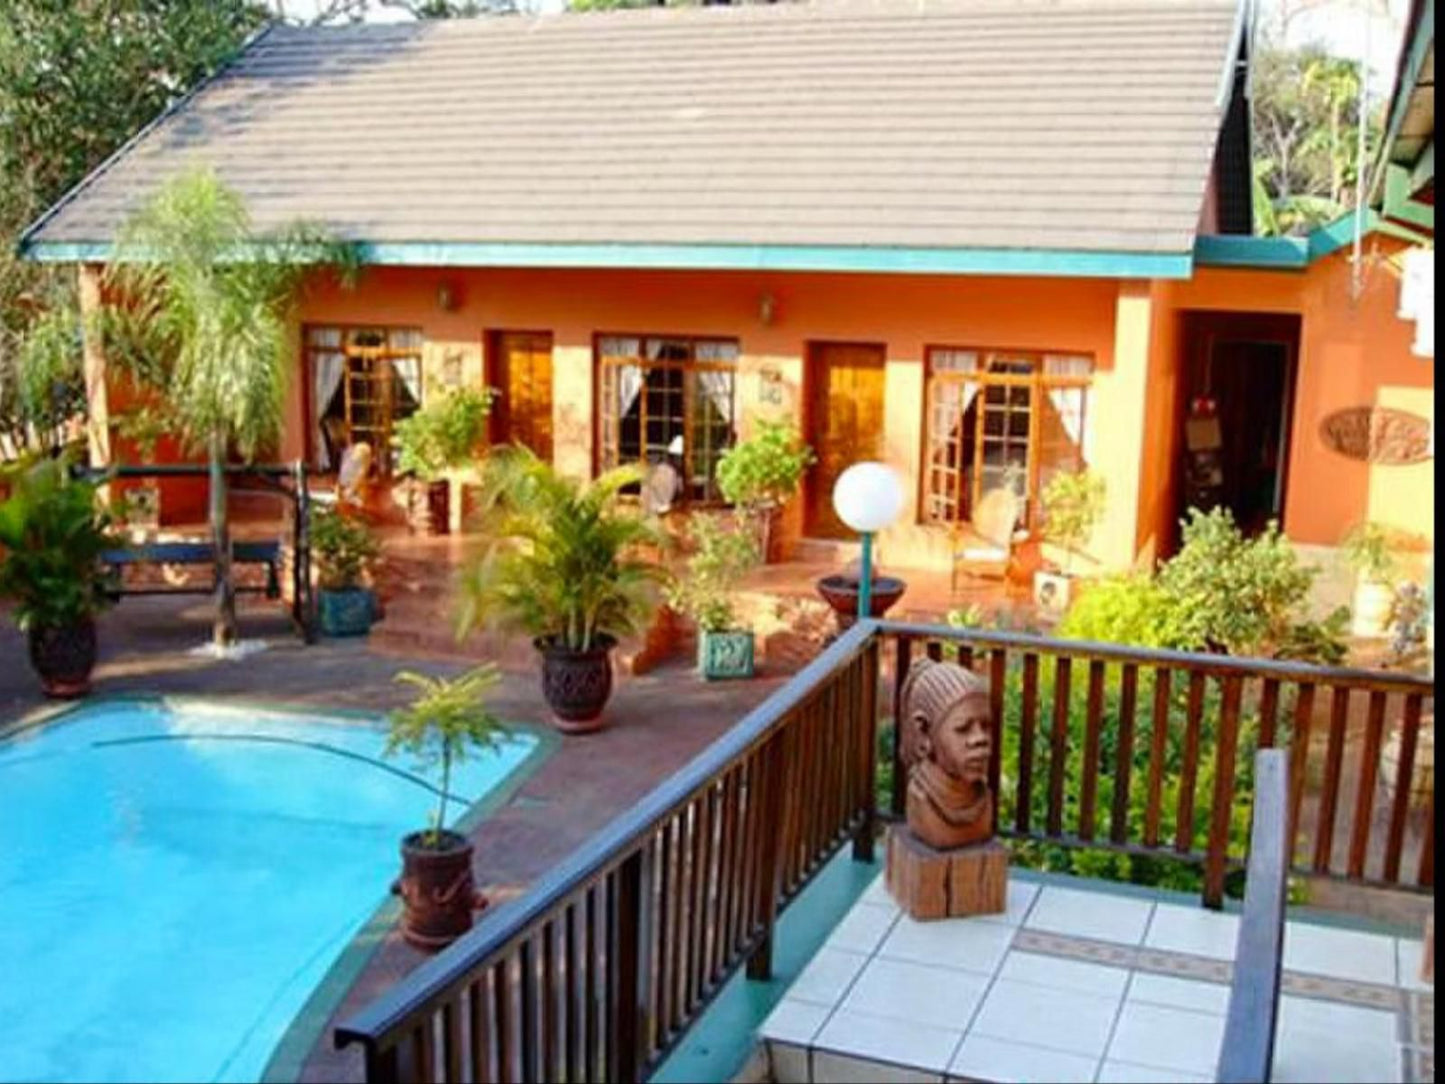 Harmony Guesthouse Nelspruit Mpumalanga South Africa Complementary Colors, House, Building, Architecture, Garden, Nature, Plant, Swimming Pool